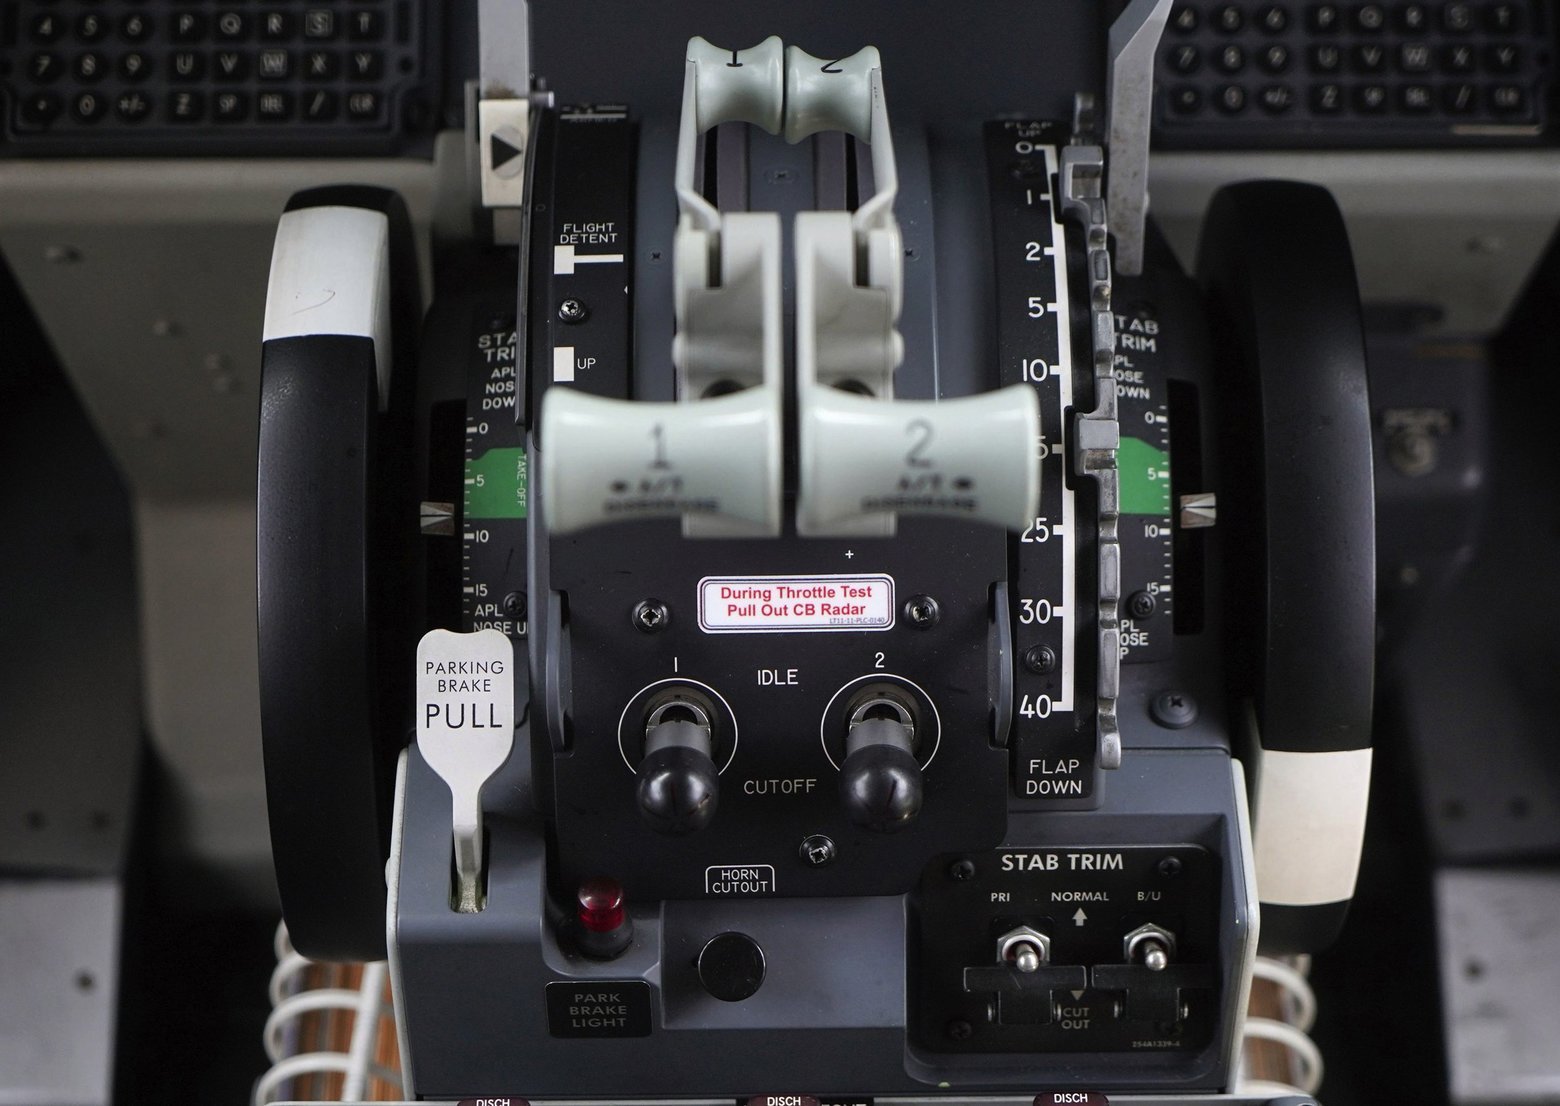 Figure 9. The aisle-stand controls in the cockpit of a Boeing 737 Max. If the two switches shown at the bottom right under the STAB TRIM label are flipped to the cutout position, all automated movement of the horizontal stabilizer is disabled, including MCAS. Source: Dimas Ardian/Bloomberg via Seattle Times (Click image to enlarge)